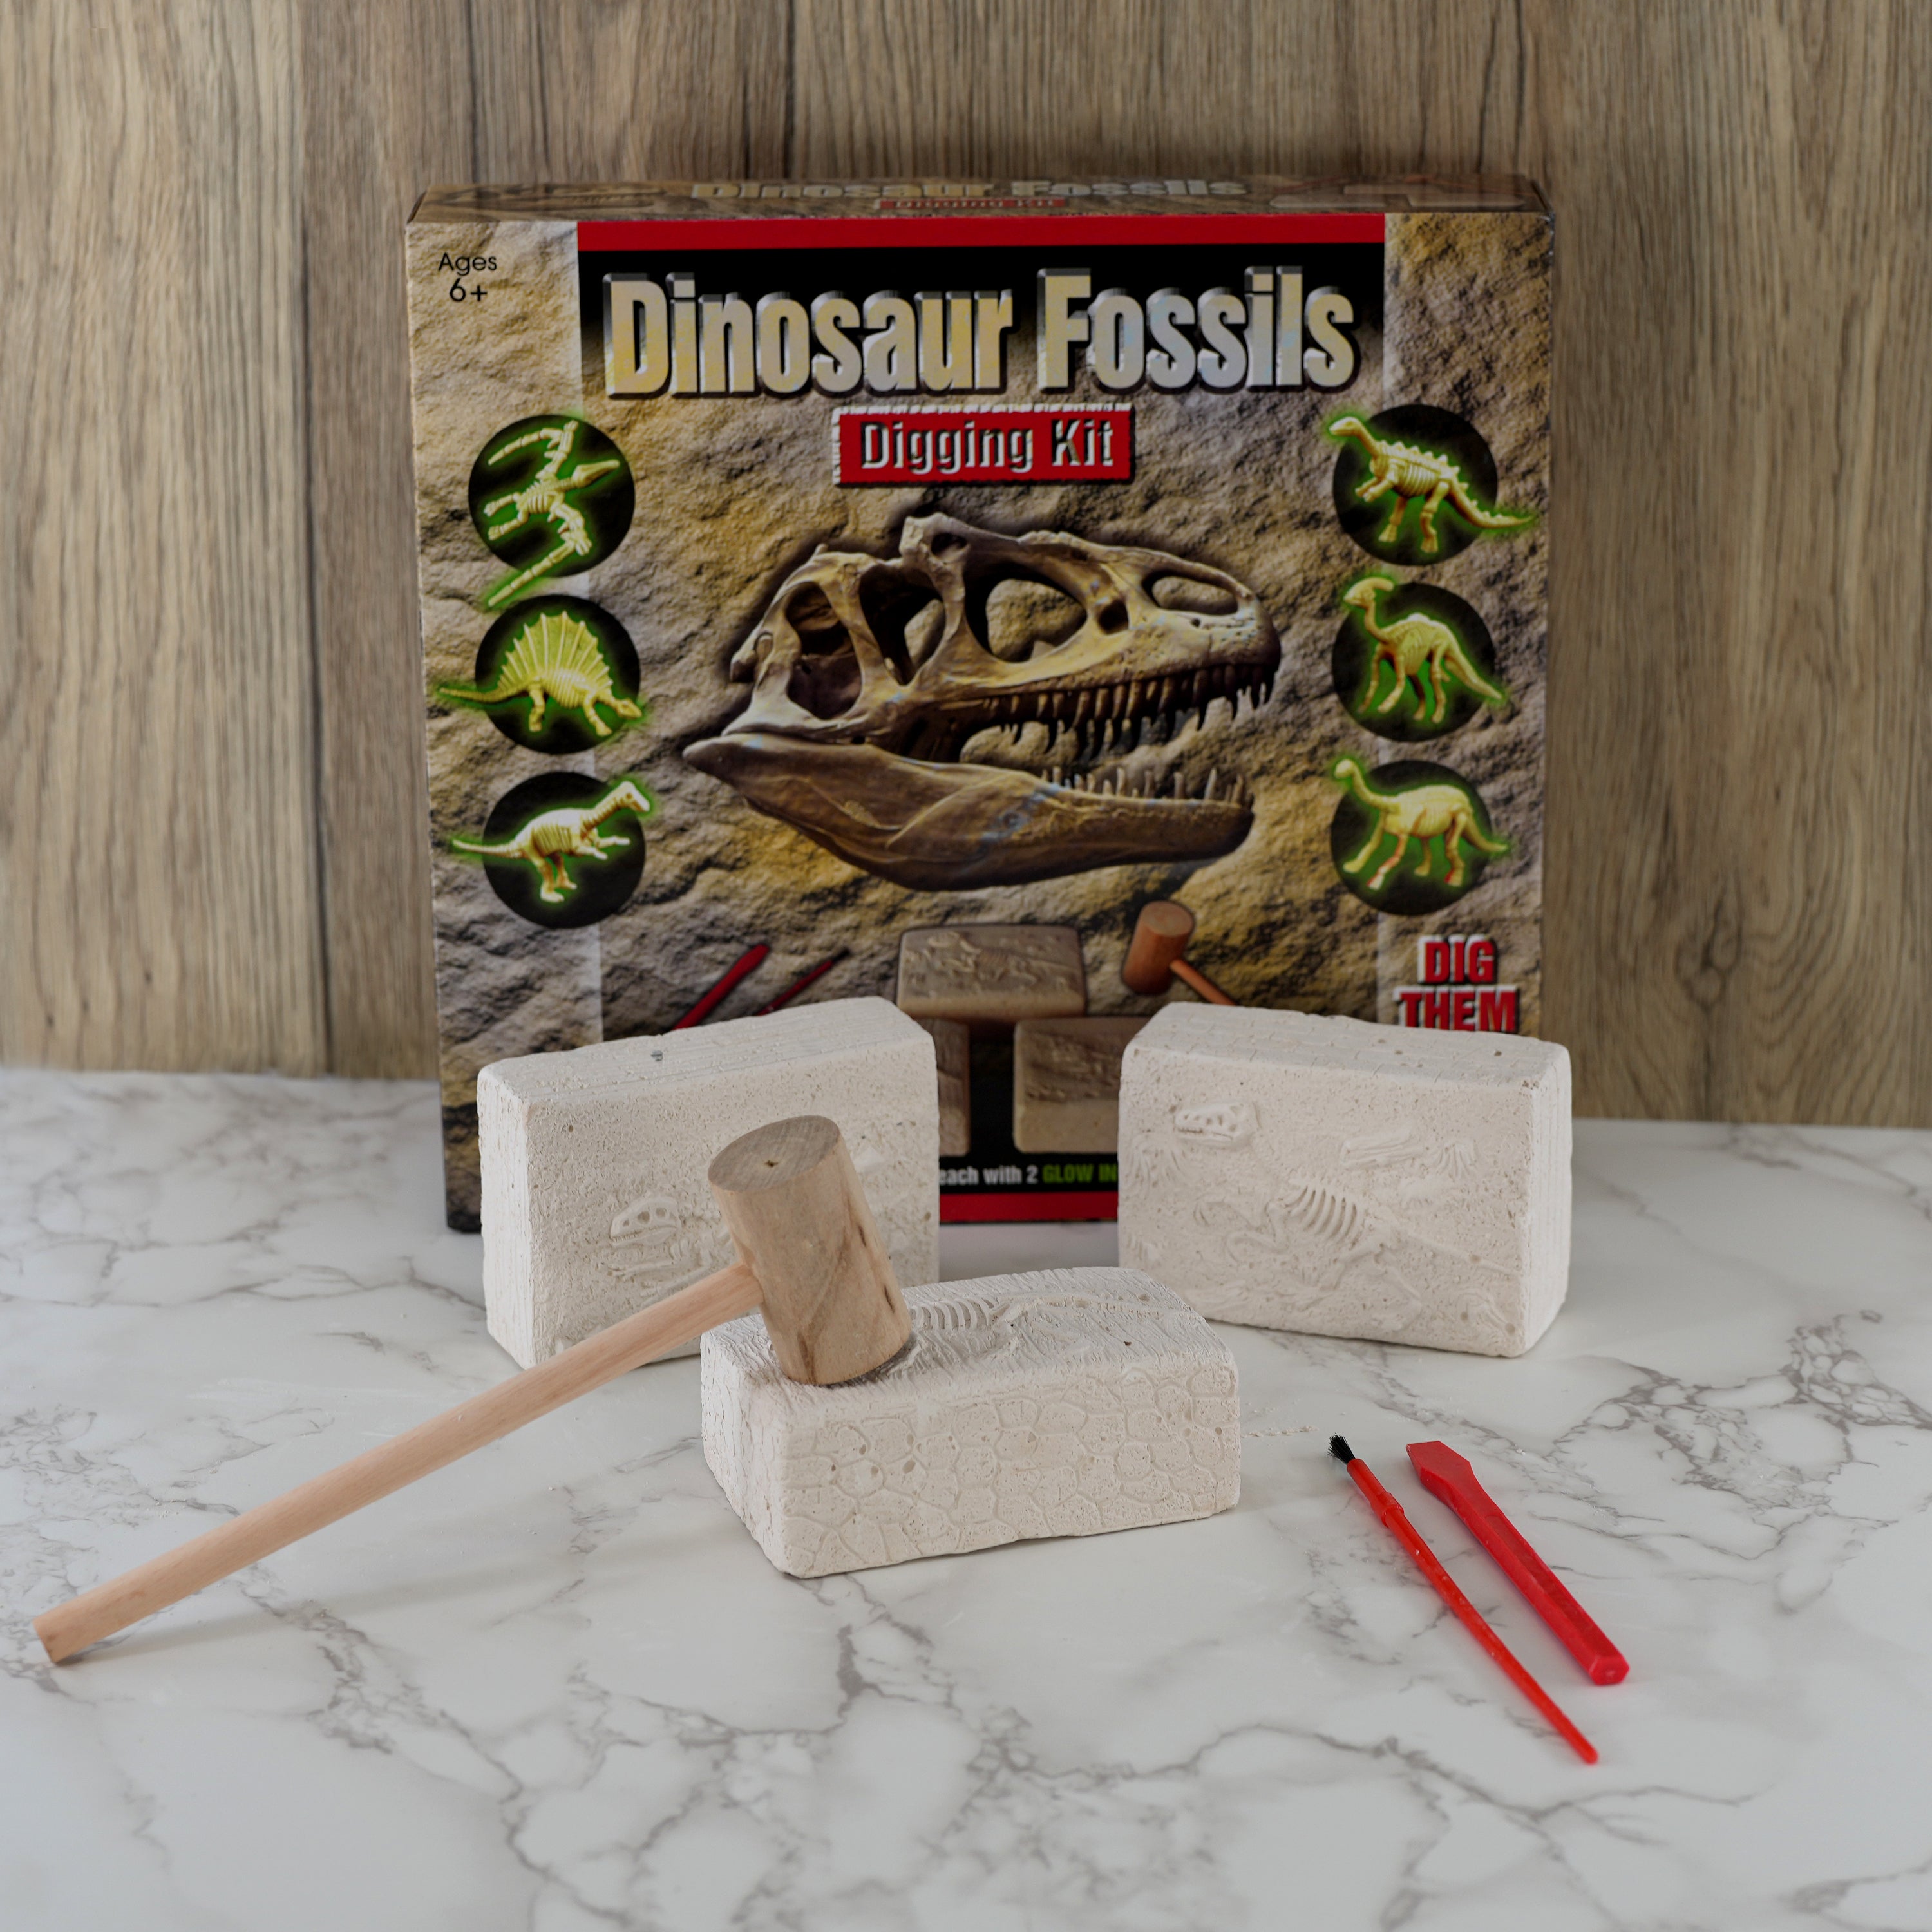 Dinosaur Fossils Digging Kit The Magic Toy Shop - The Magic Toy Shop